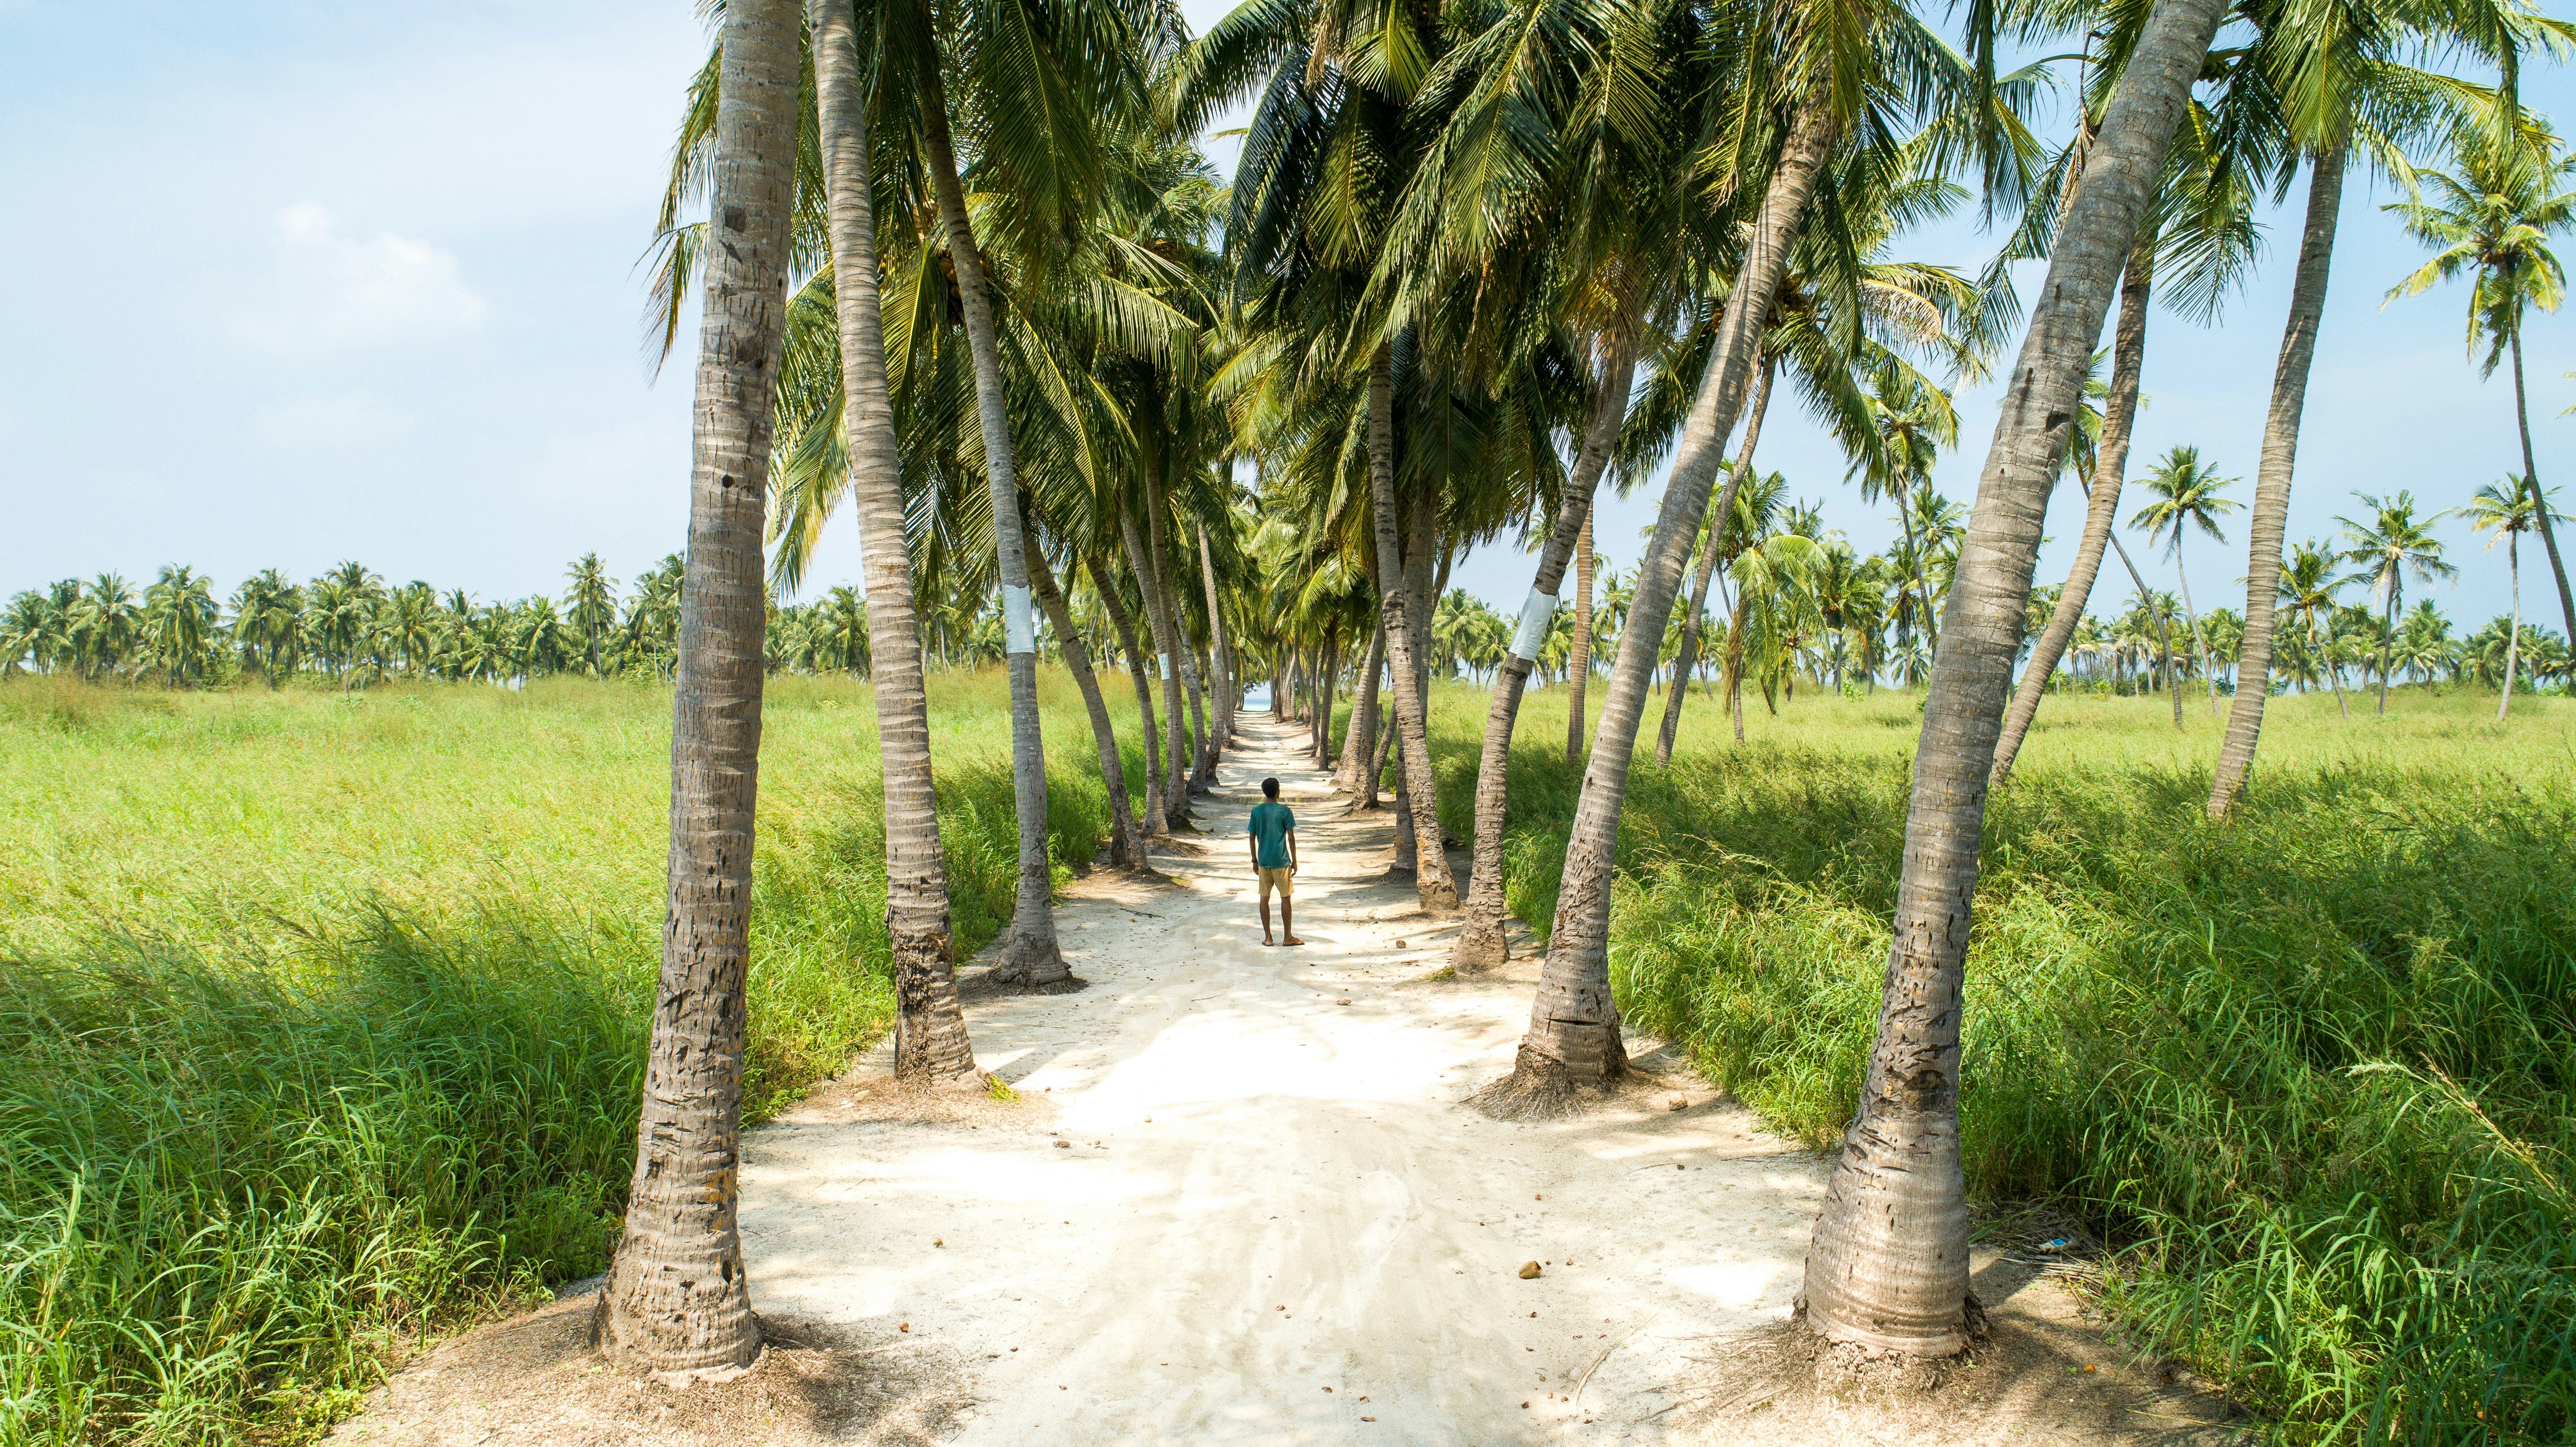 road with rows of coconut trees on the sides